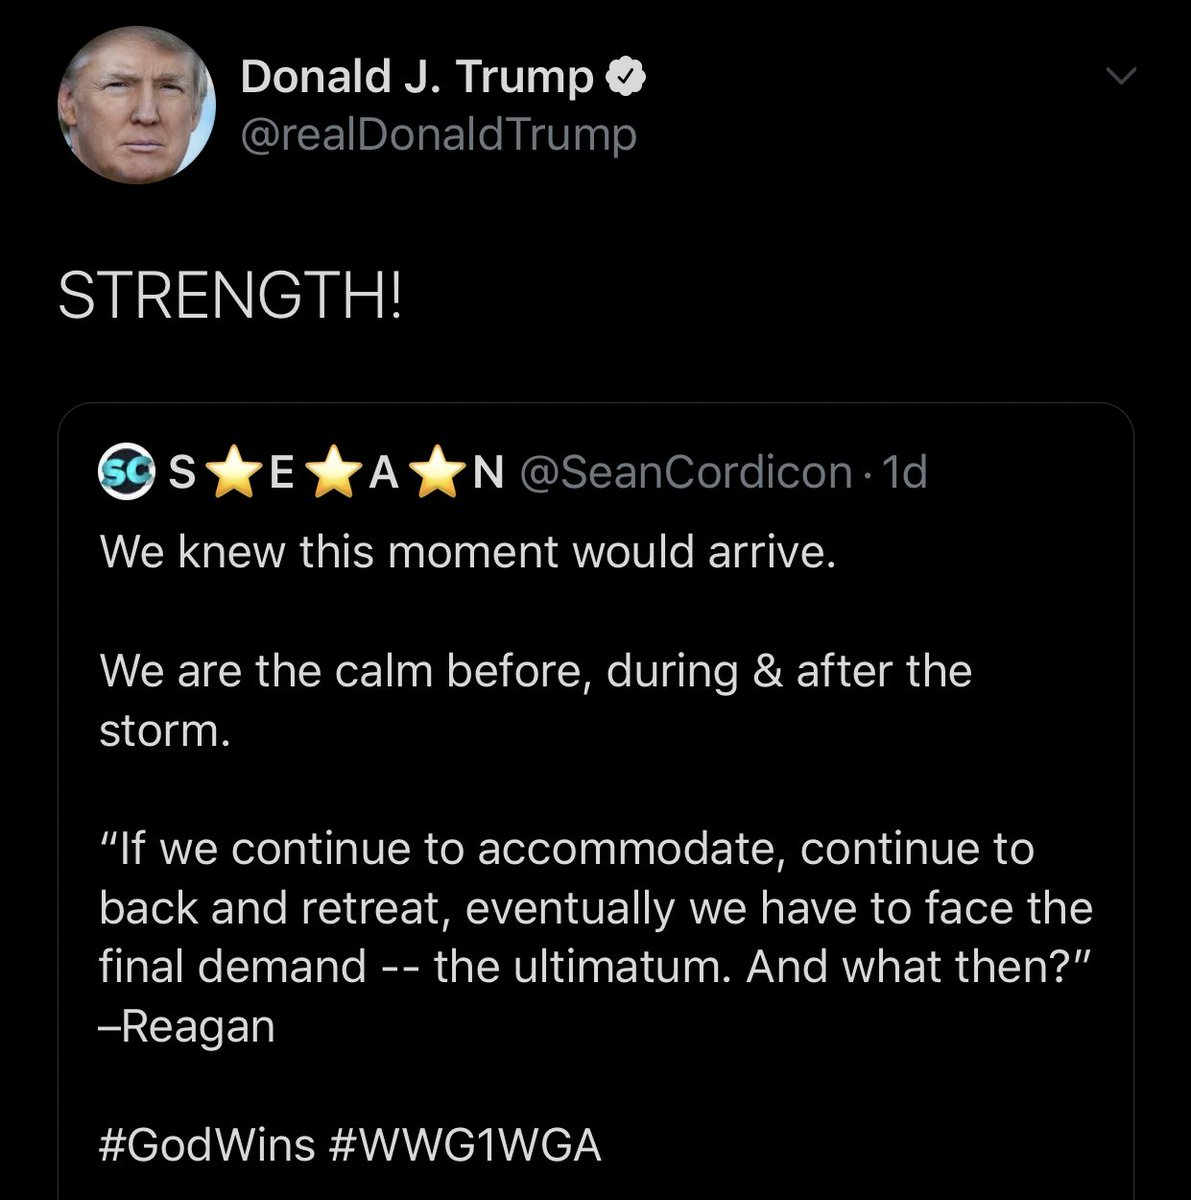 POTUS tweeted his support for QAnon?